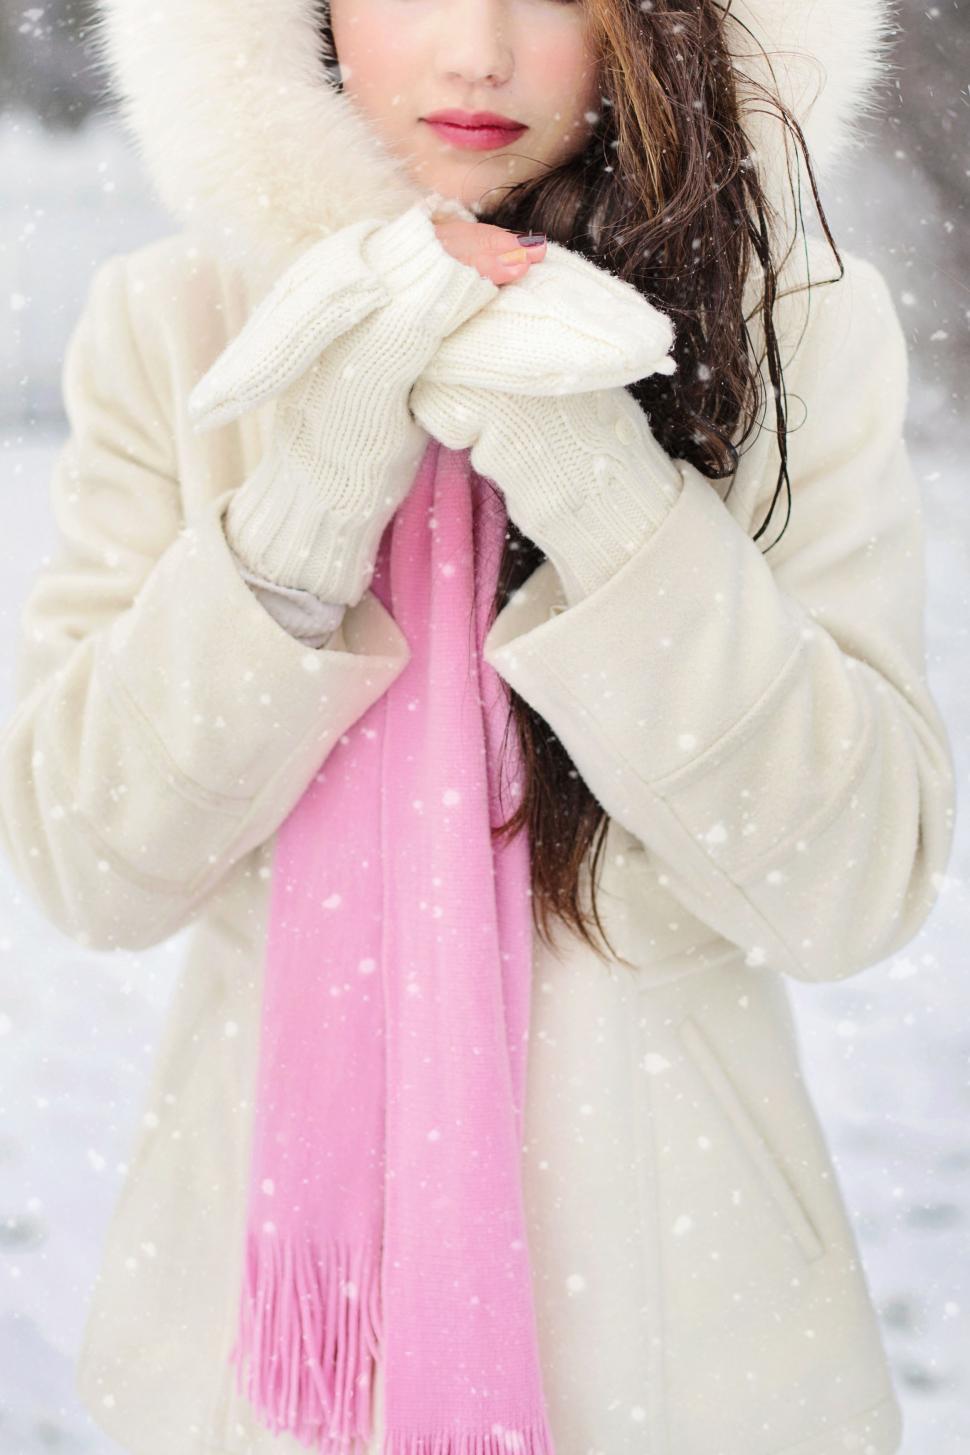 Free Stock Photo of Woman in white winter jacket in snow